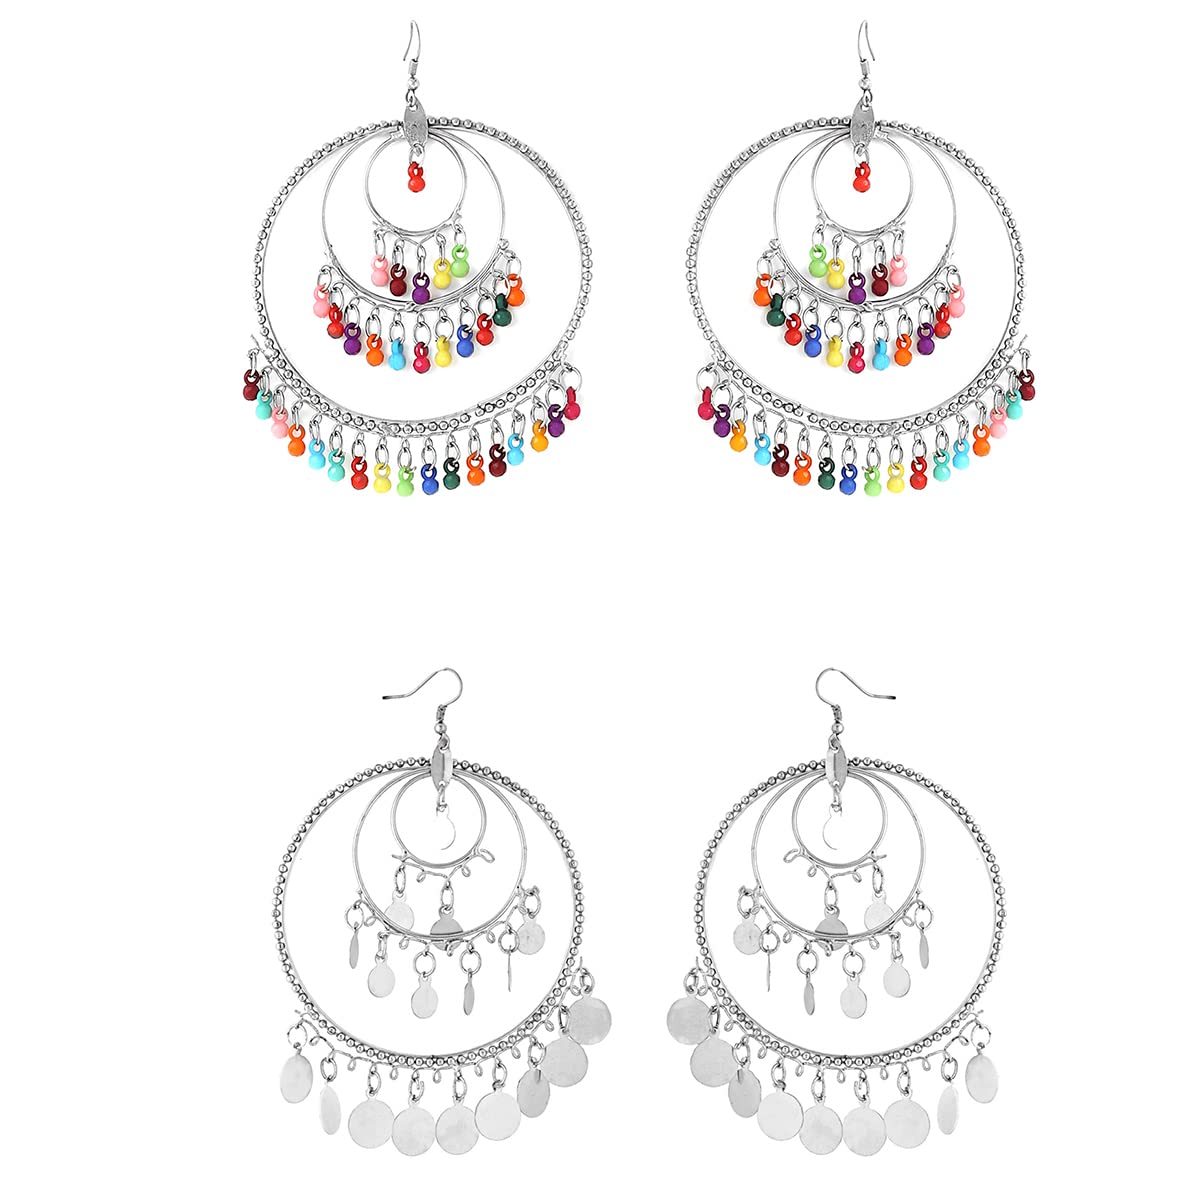 Yellow Chimes Chandbali Earrings for Women Oxidised Silver Combo of 2 Pairs Traditional Chand bali Earrings for Women and Girls.